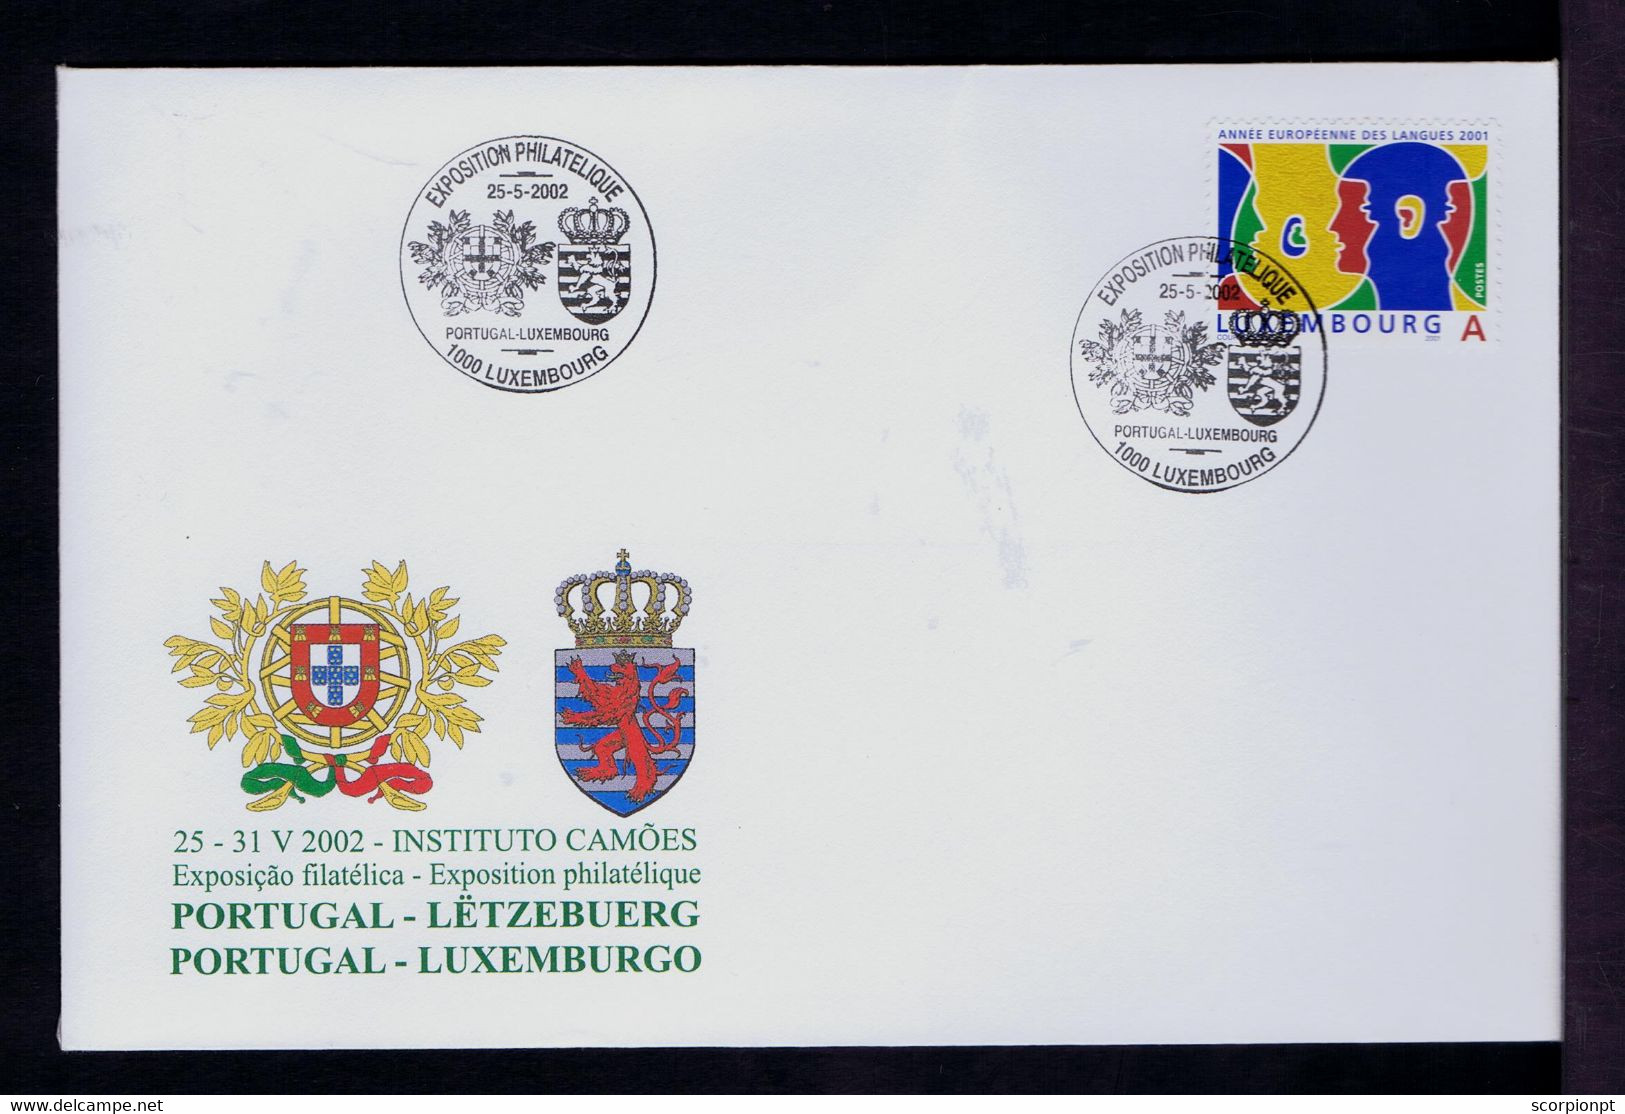 Portugal Luxembourg Brasons Coat Of Arms 2002 Philatelic Exhibition Heraldic Sp7529 - Hologramme